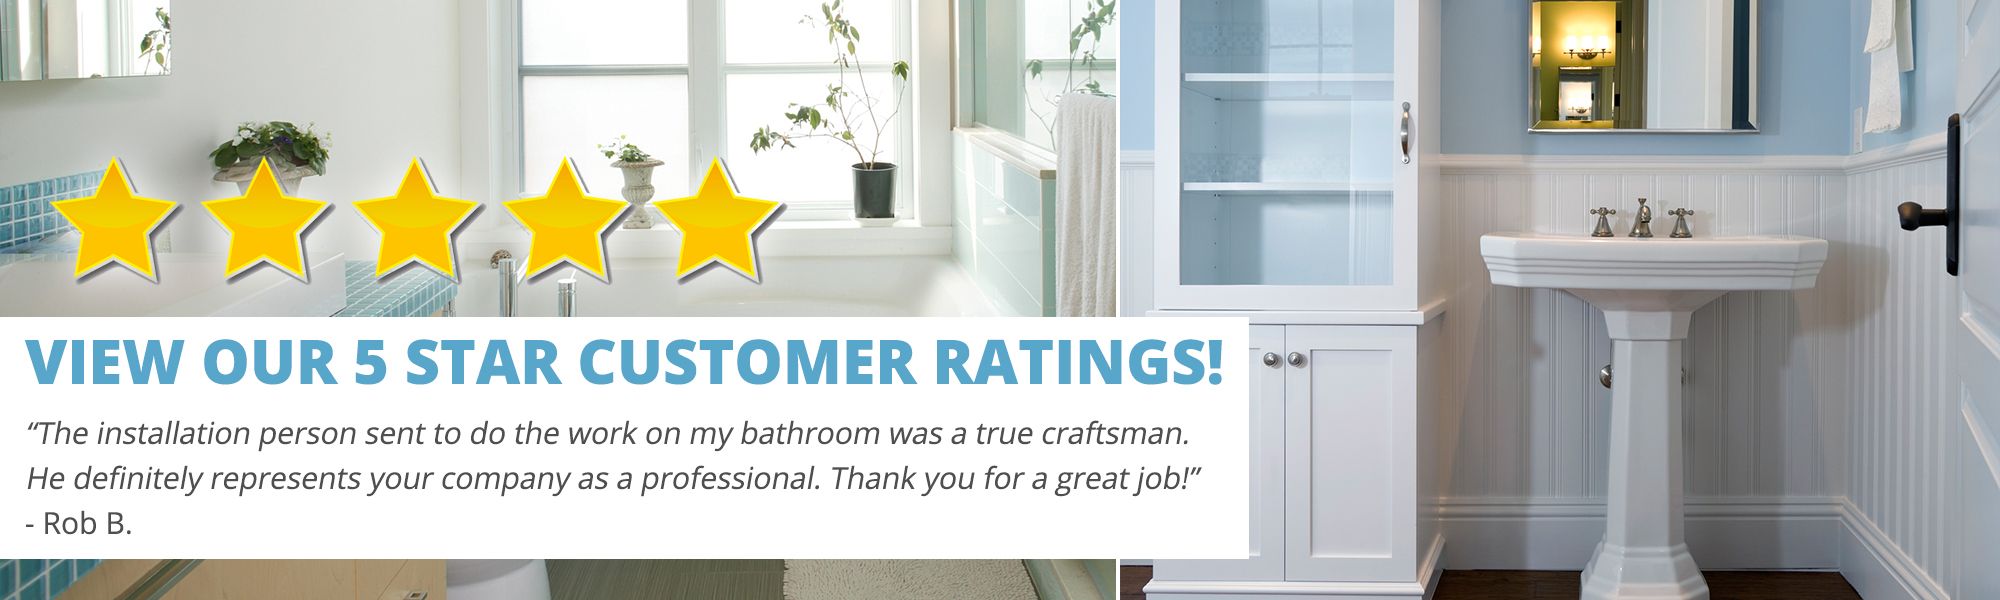 View Our 5-Star Customer Ratings